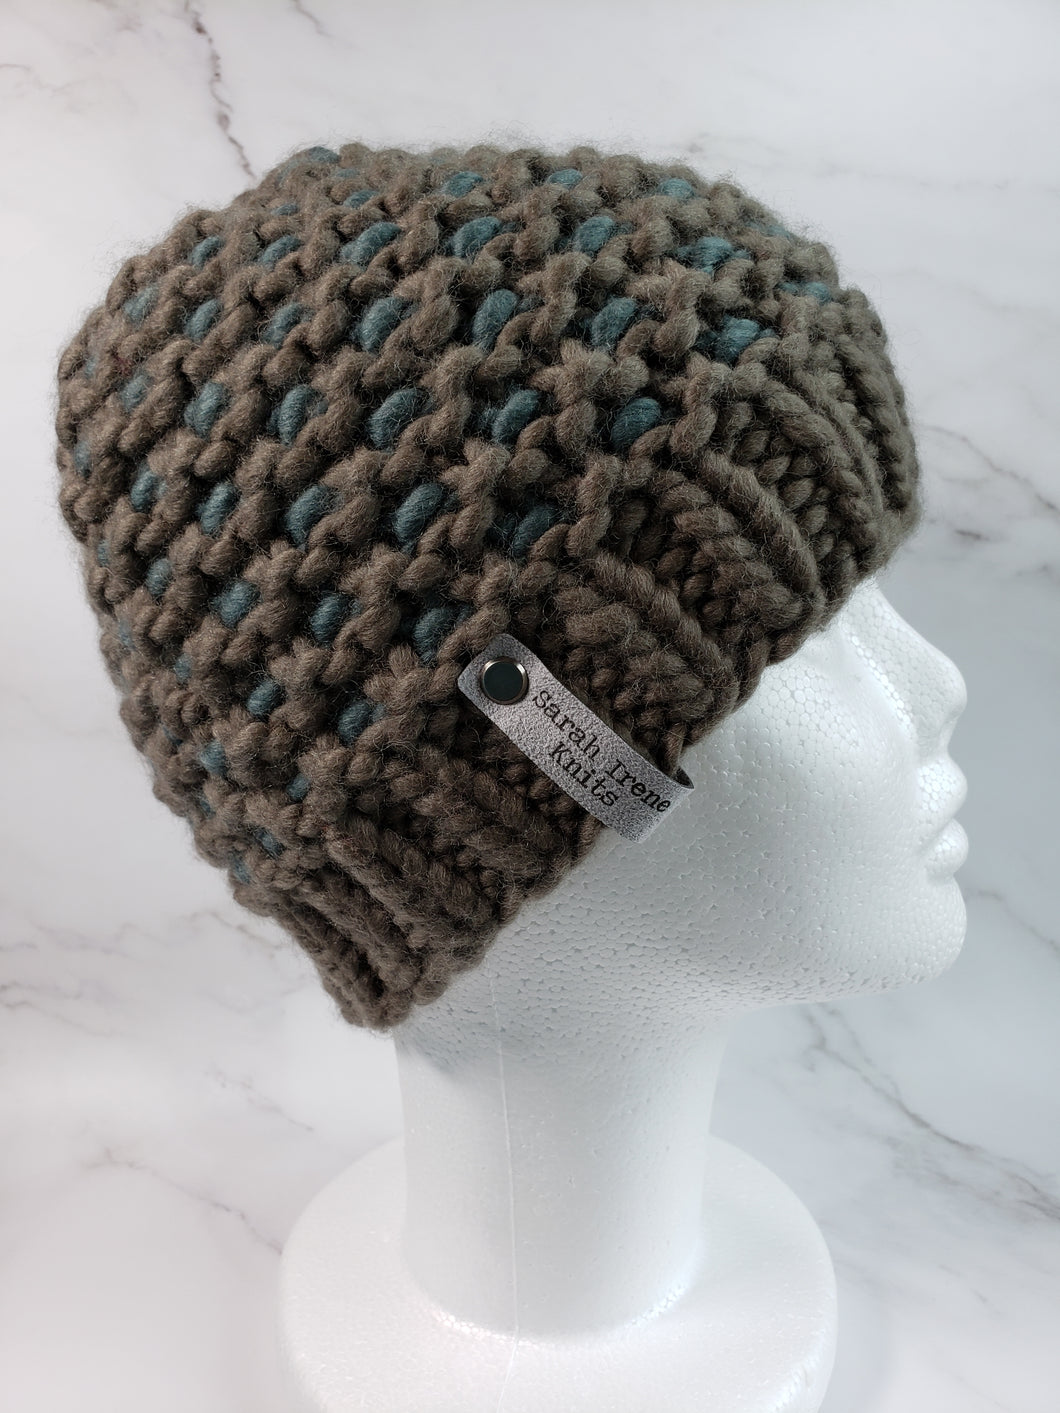 Windowpane effect beanie in a brownish grey color with teal contrast. No pom.